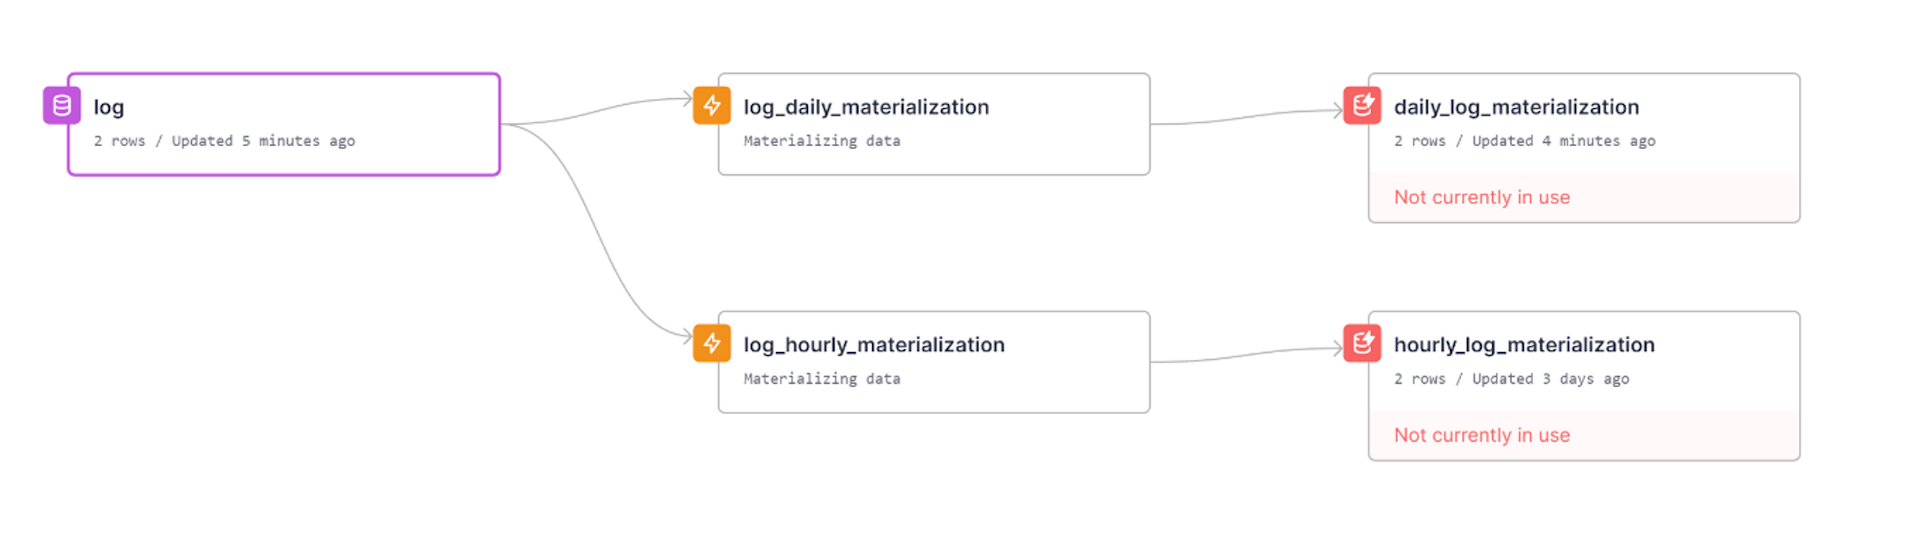 Materialized views in the data flow view